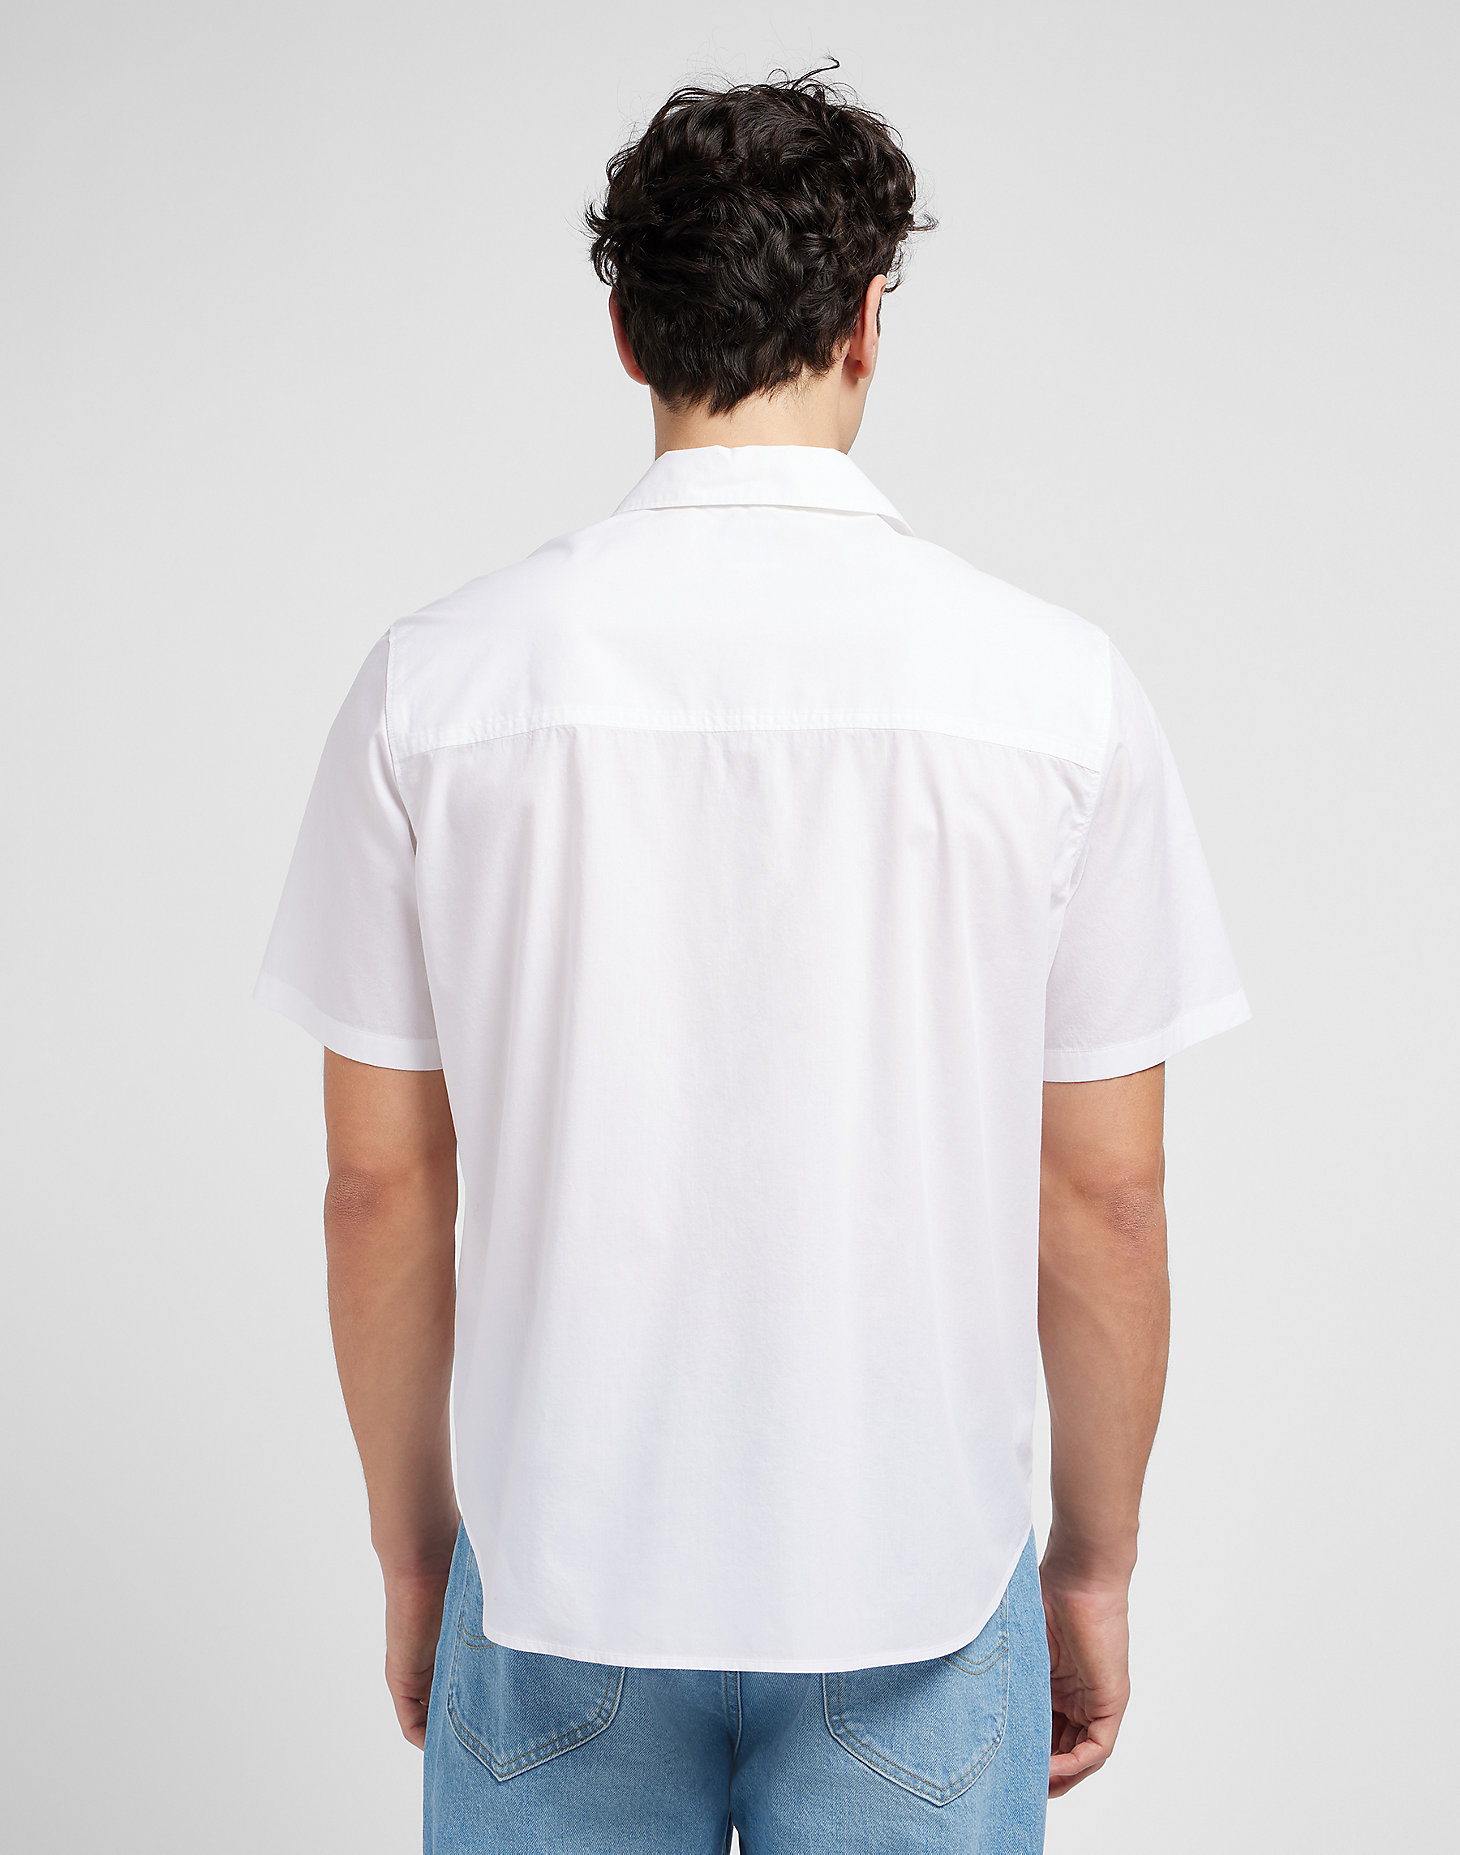 Patch Shirt in Bright White alternative view 1